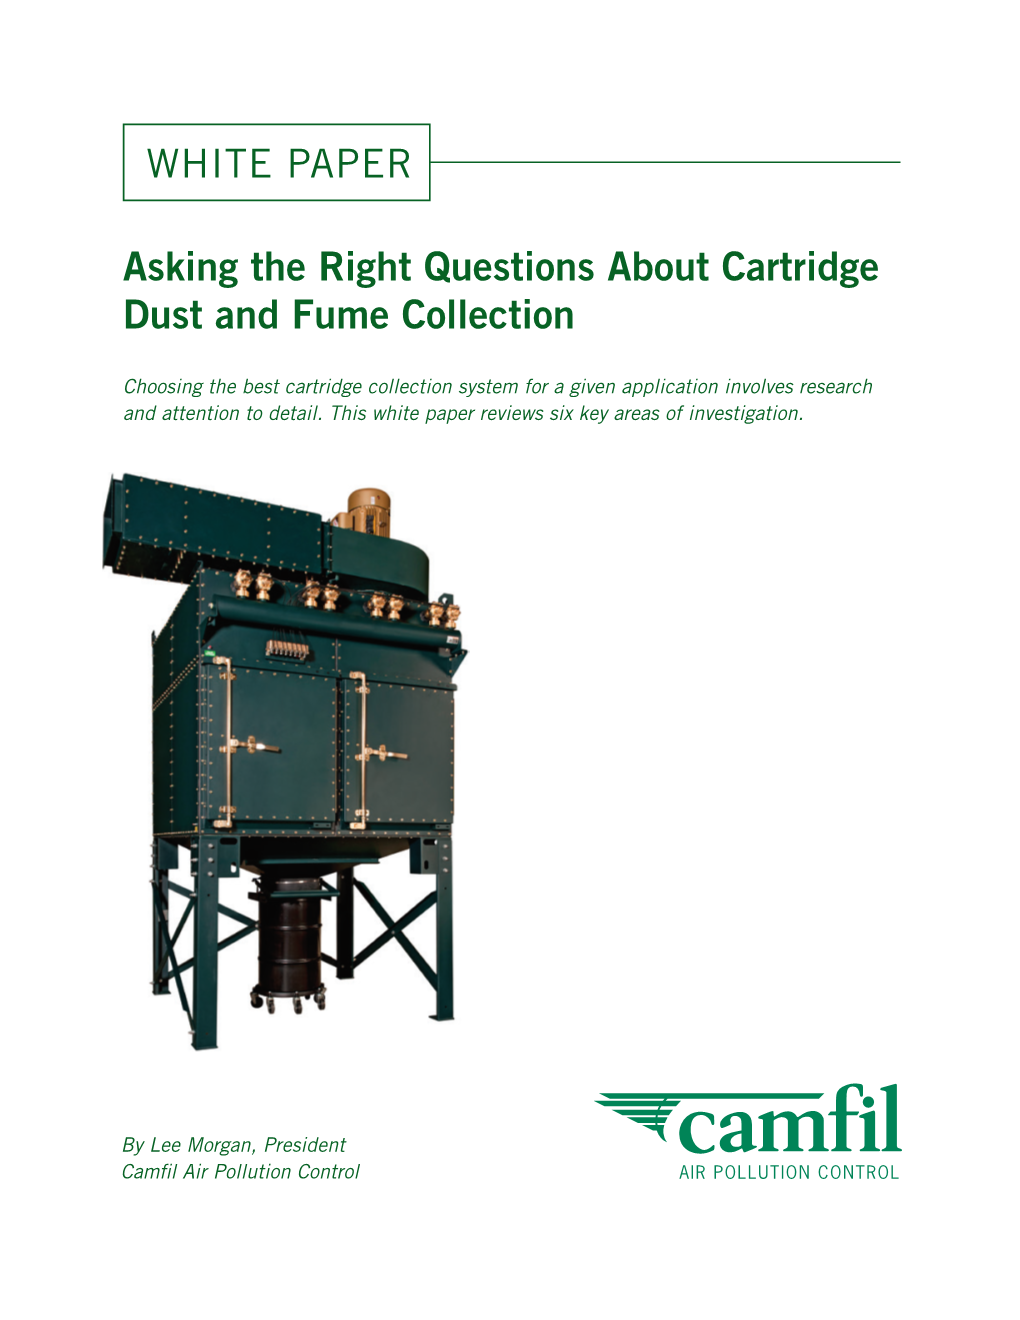 Asking the Right Questions About Cartridge Dust and Fume Collection